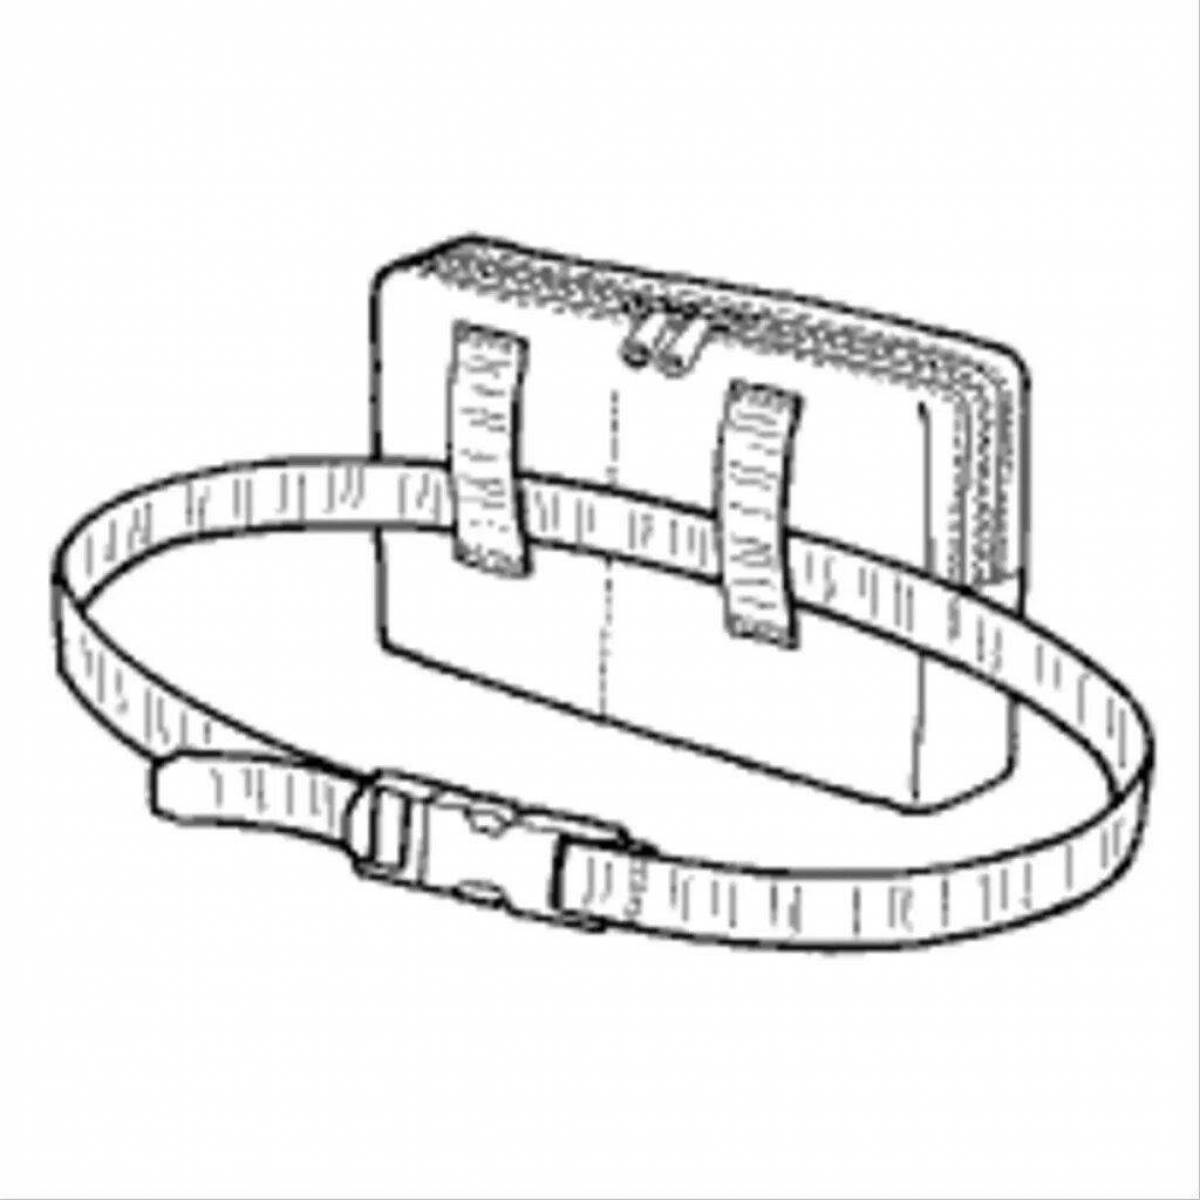 Coloring page for youth belts